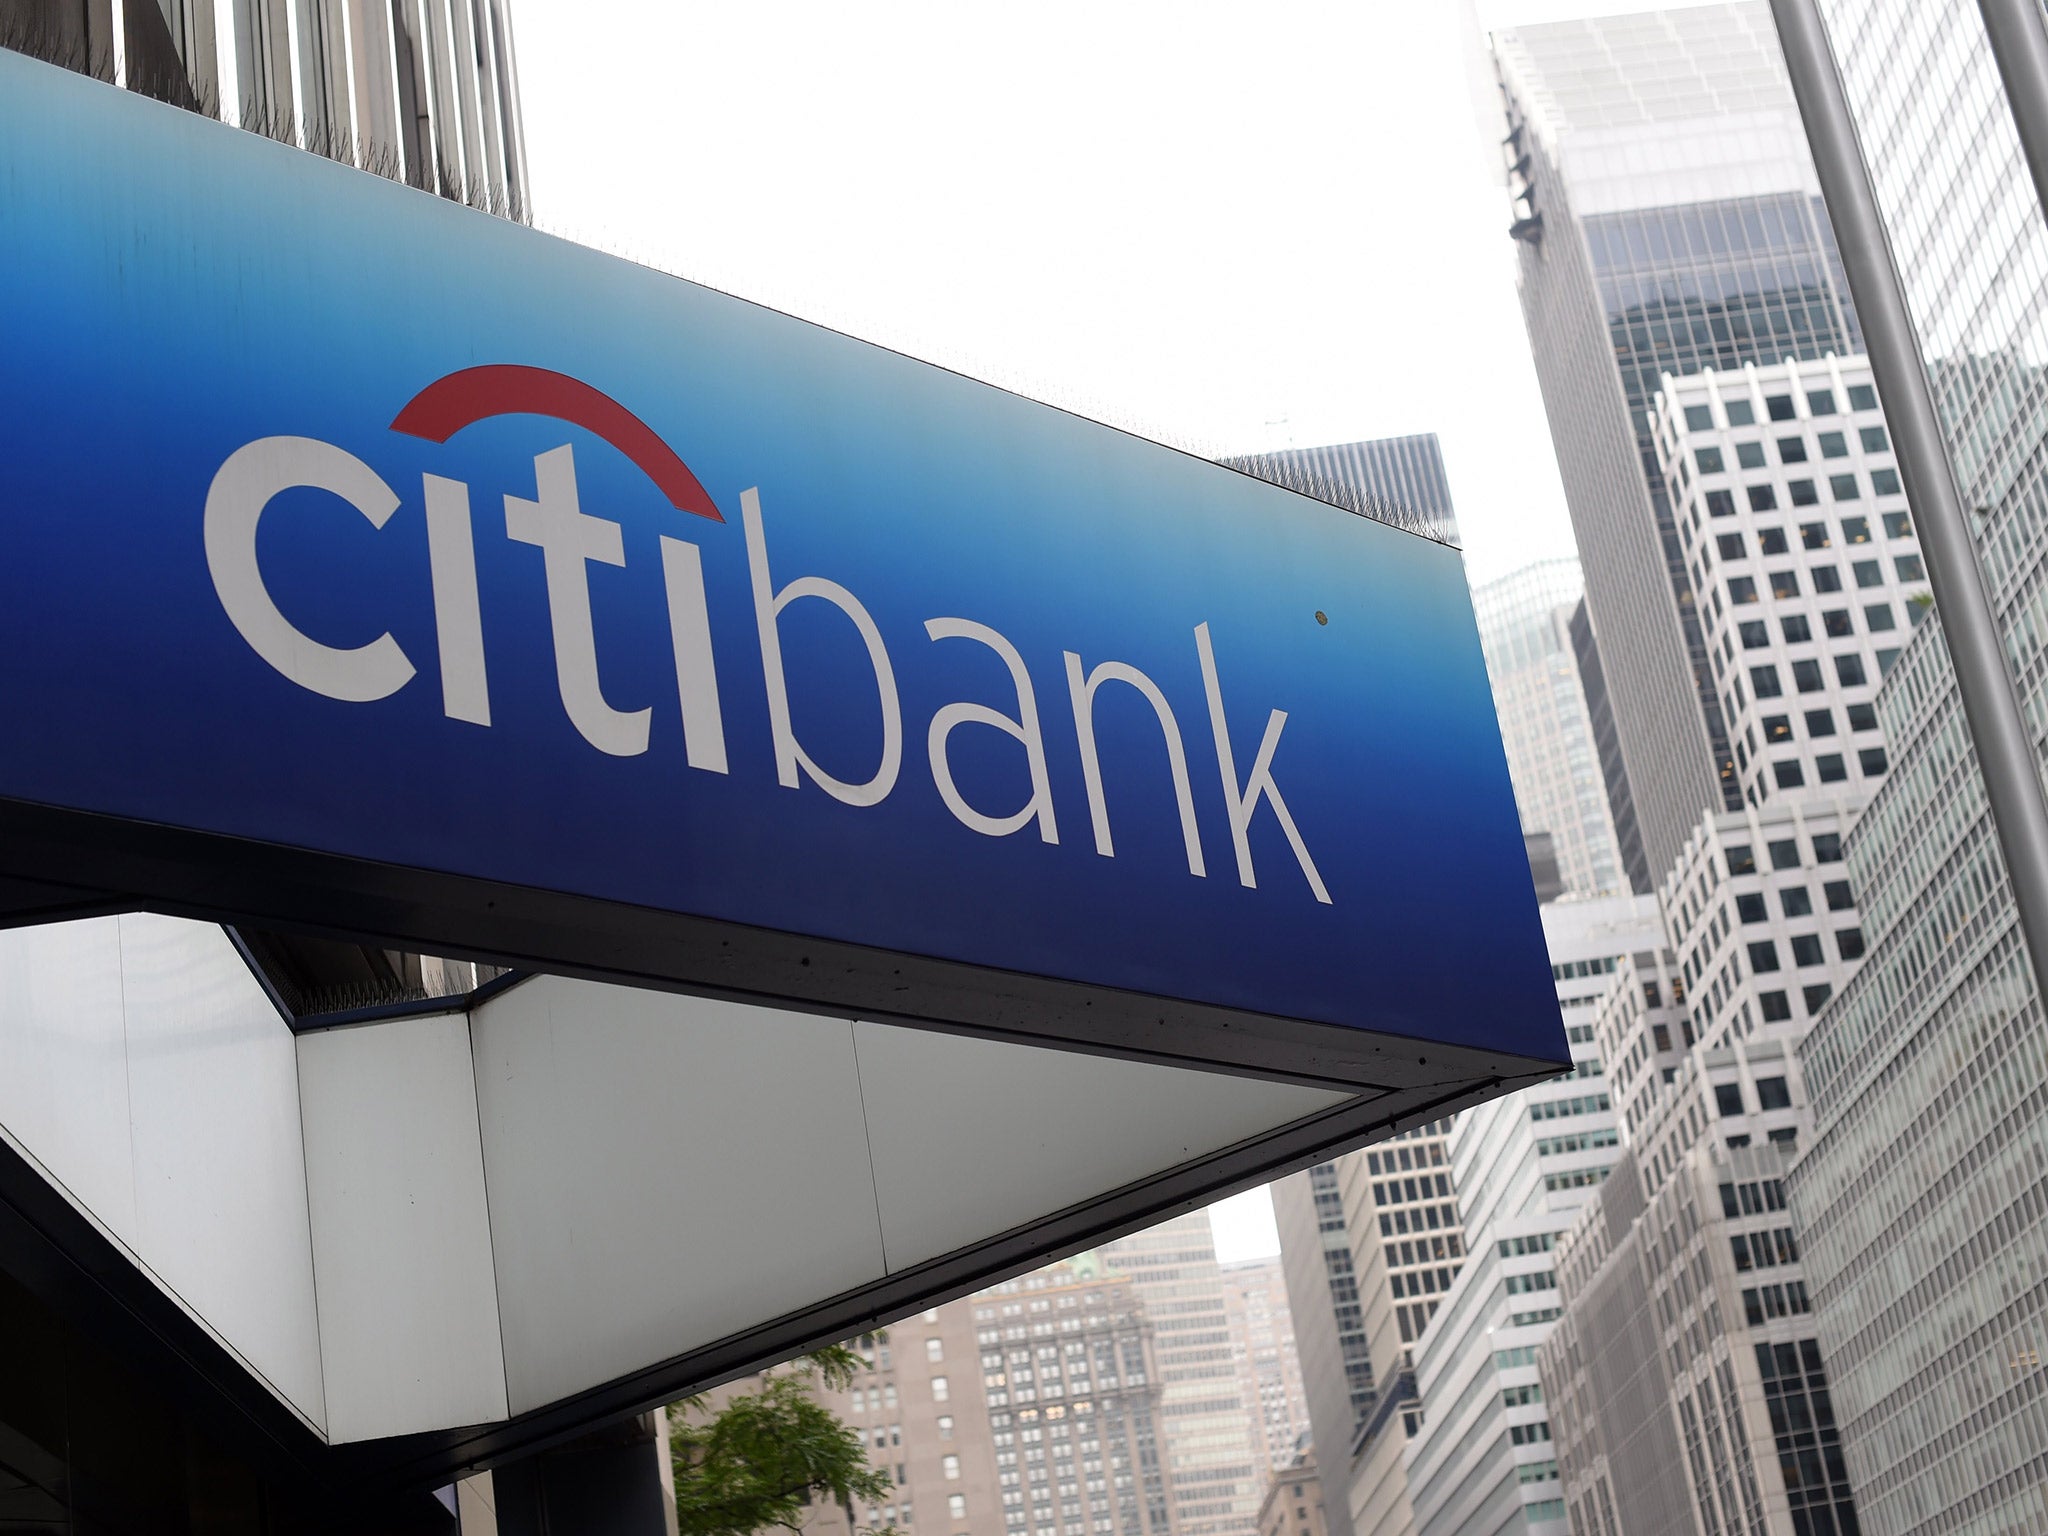 Citibank was among the US banks to be hit with hefty fines (Getty)